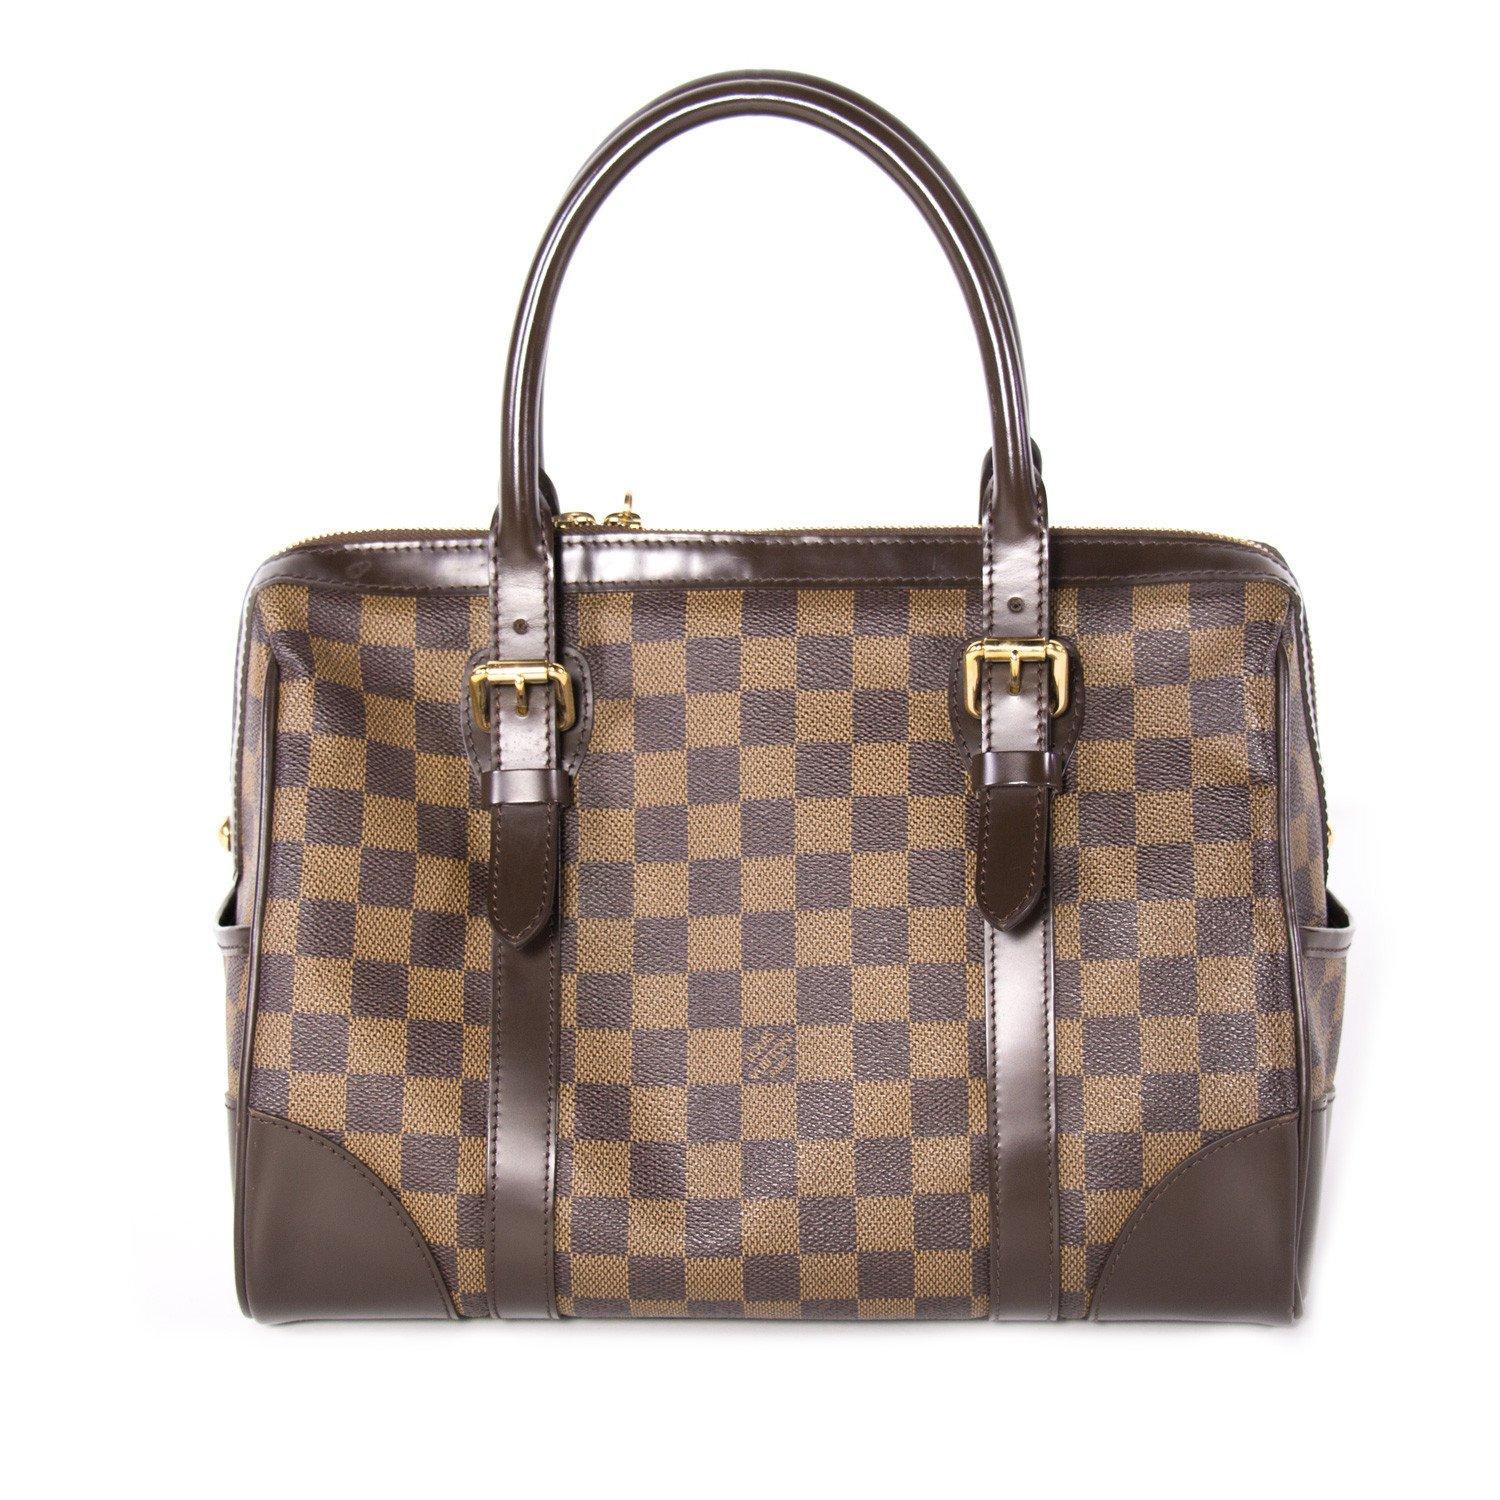 Combining Louis Vuitton’s rich heritage with its exquisite craftsmanship, this Berkeley Bag is the one that one cannot afford to miss. Softly structured from signature Damier Check Ebene Canvas, this fabulous style is finished with tonal brown